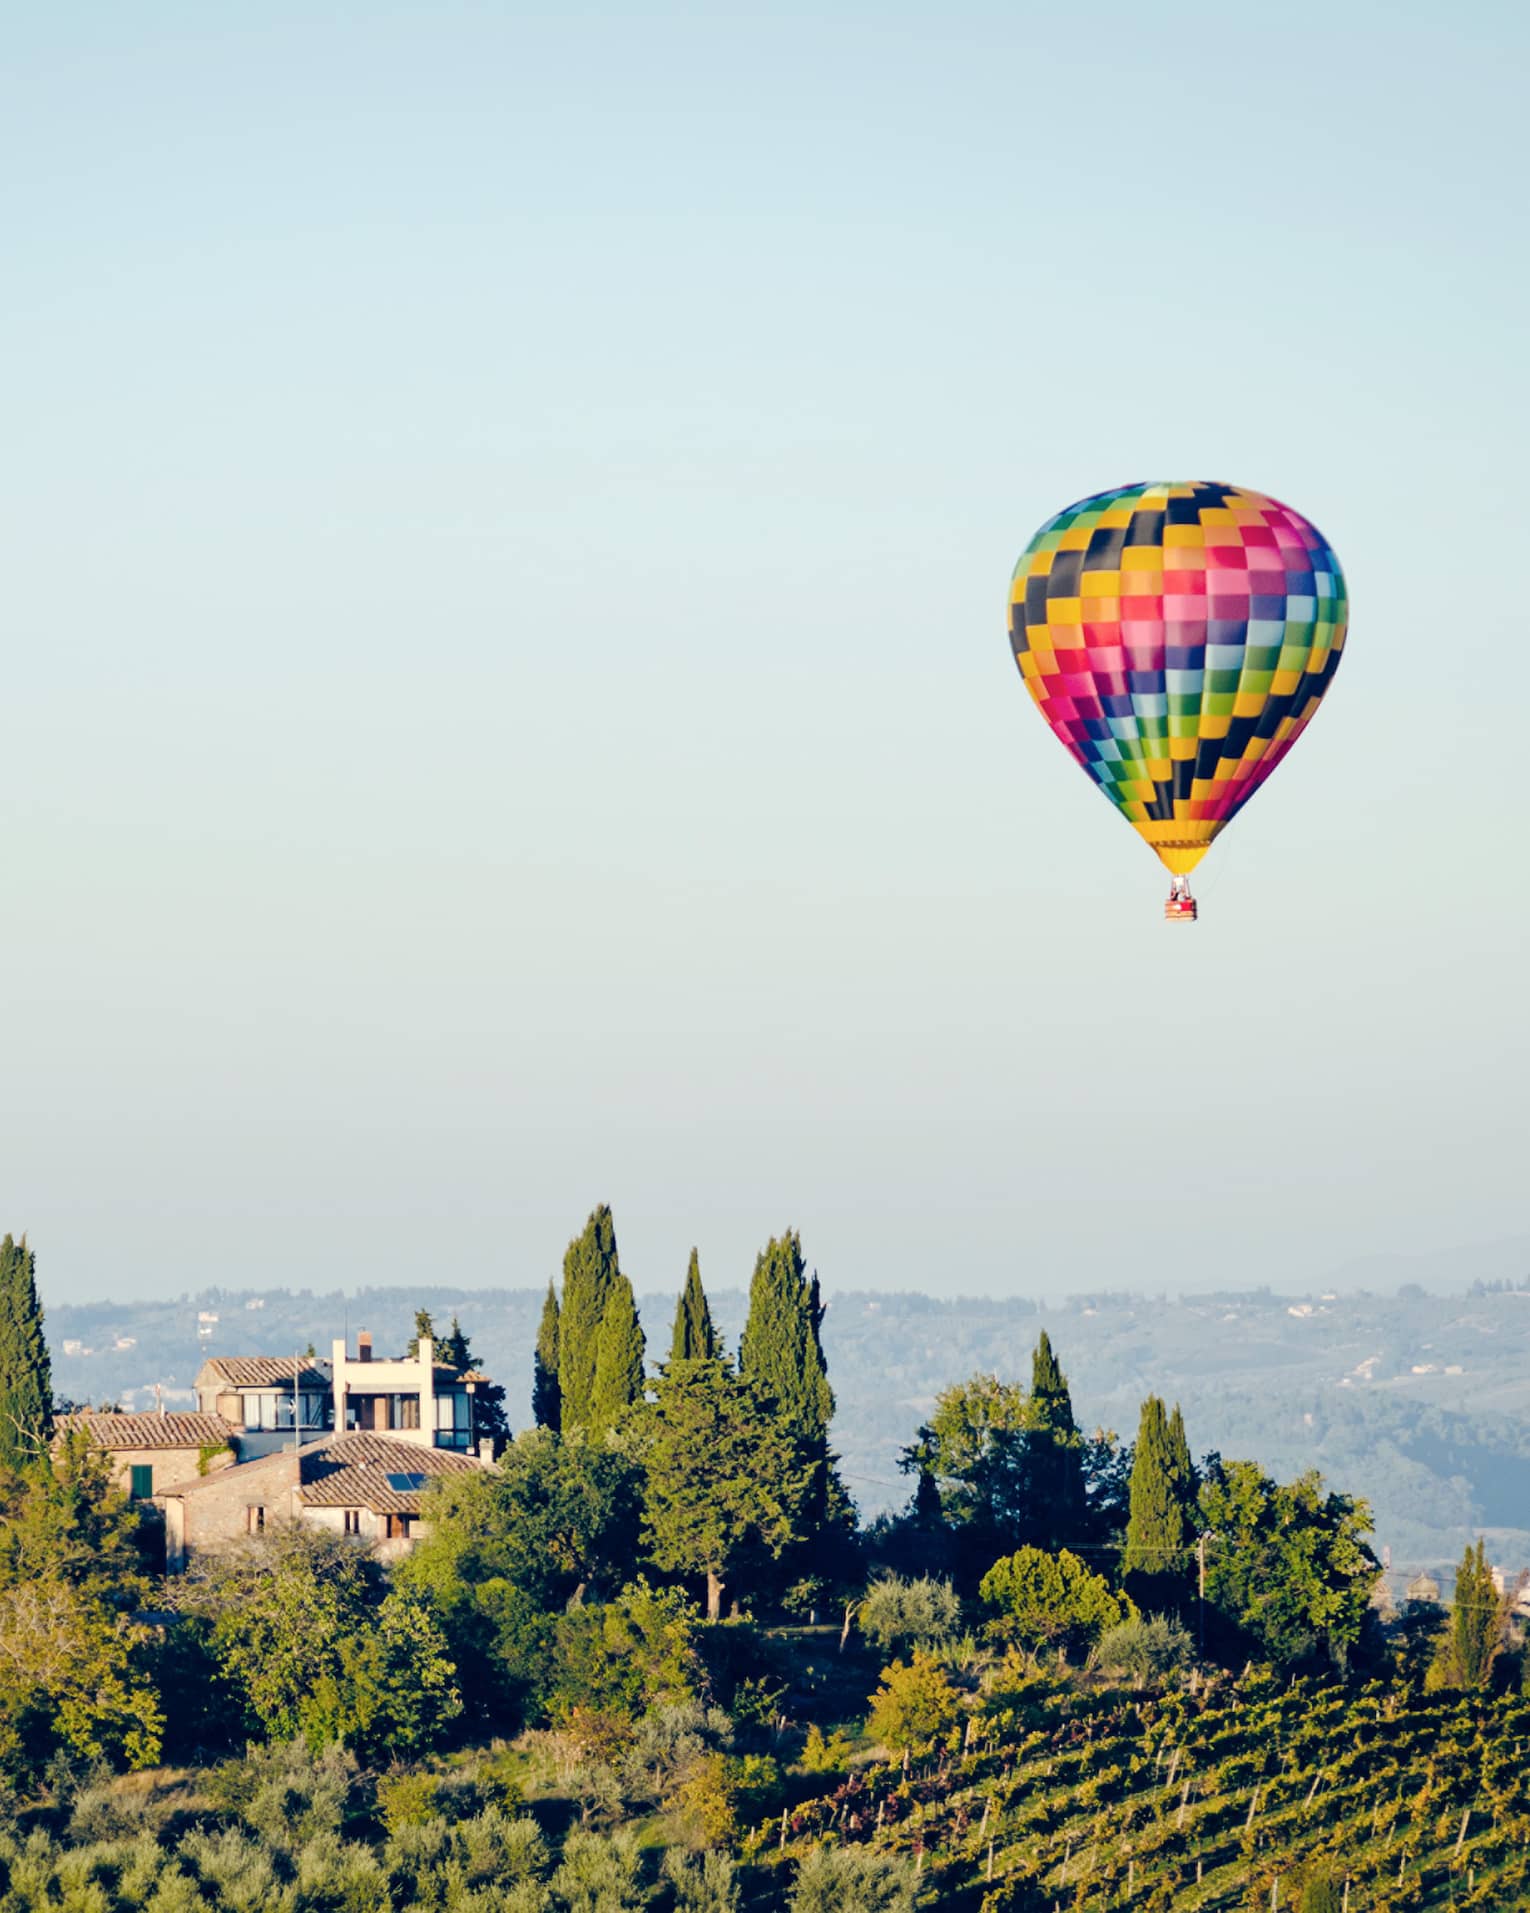 A colorful hot air balloon hovering over a vineyard in Florence